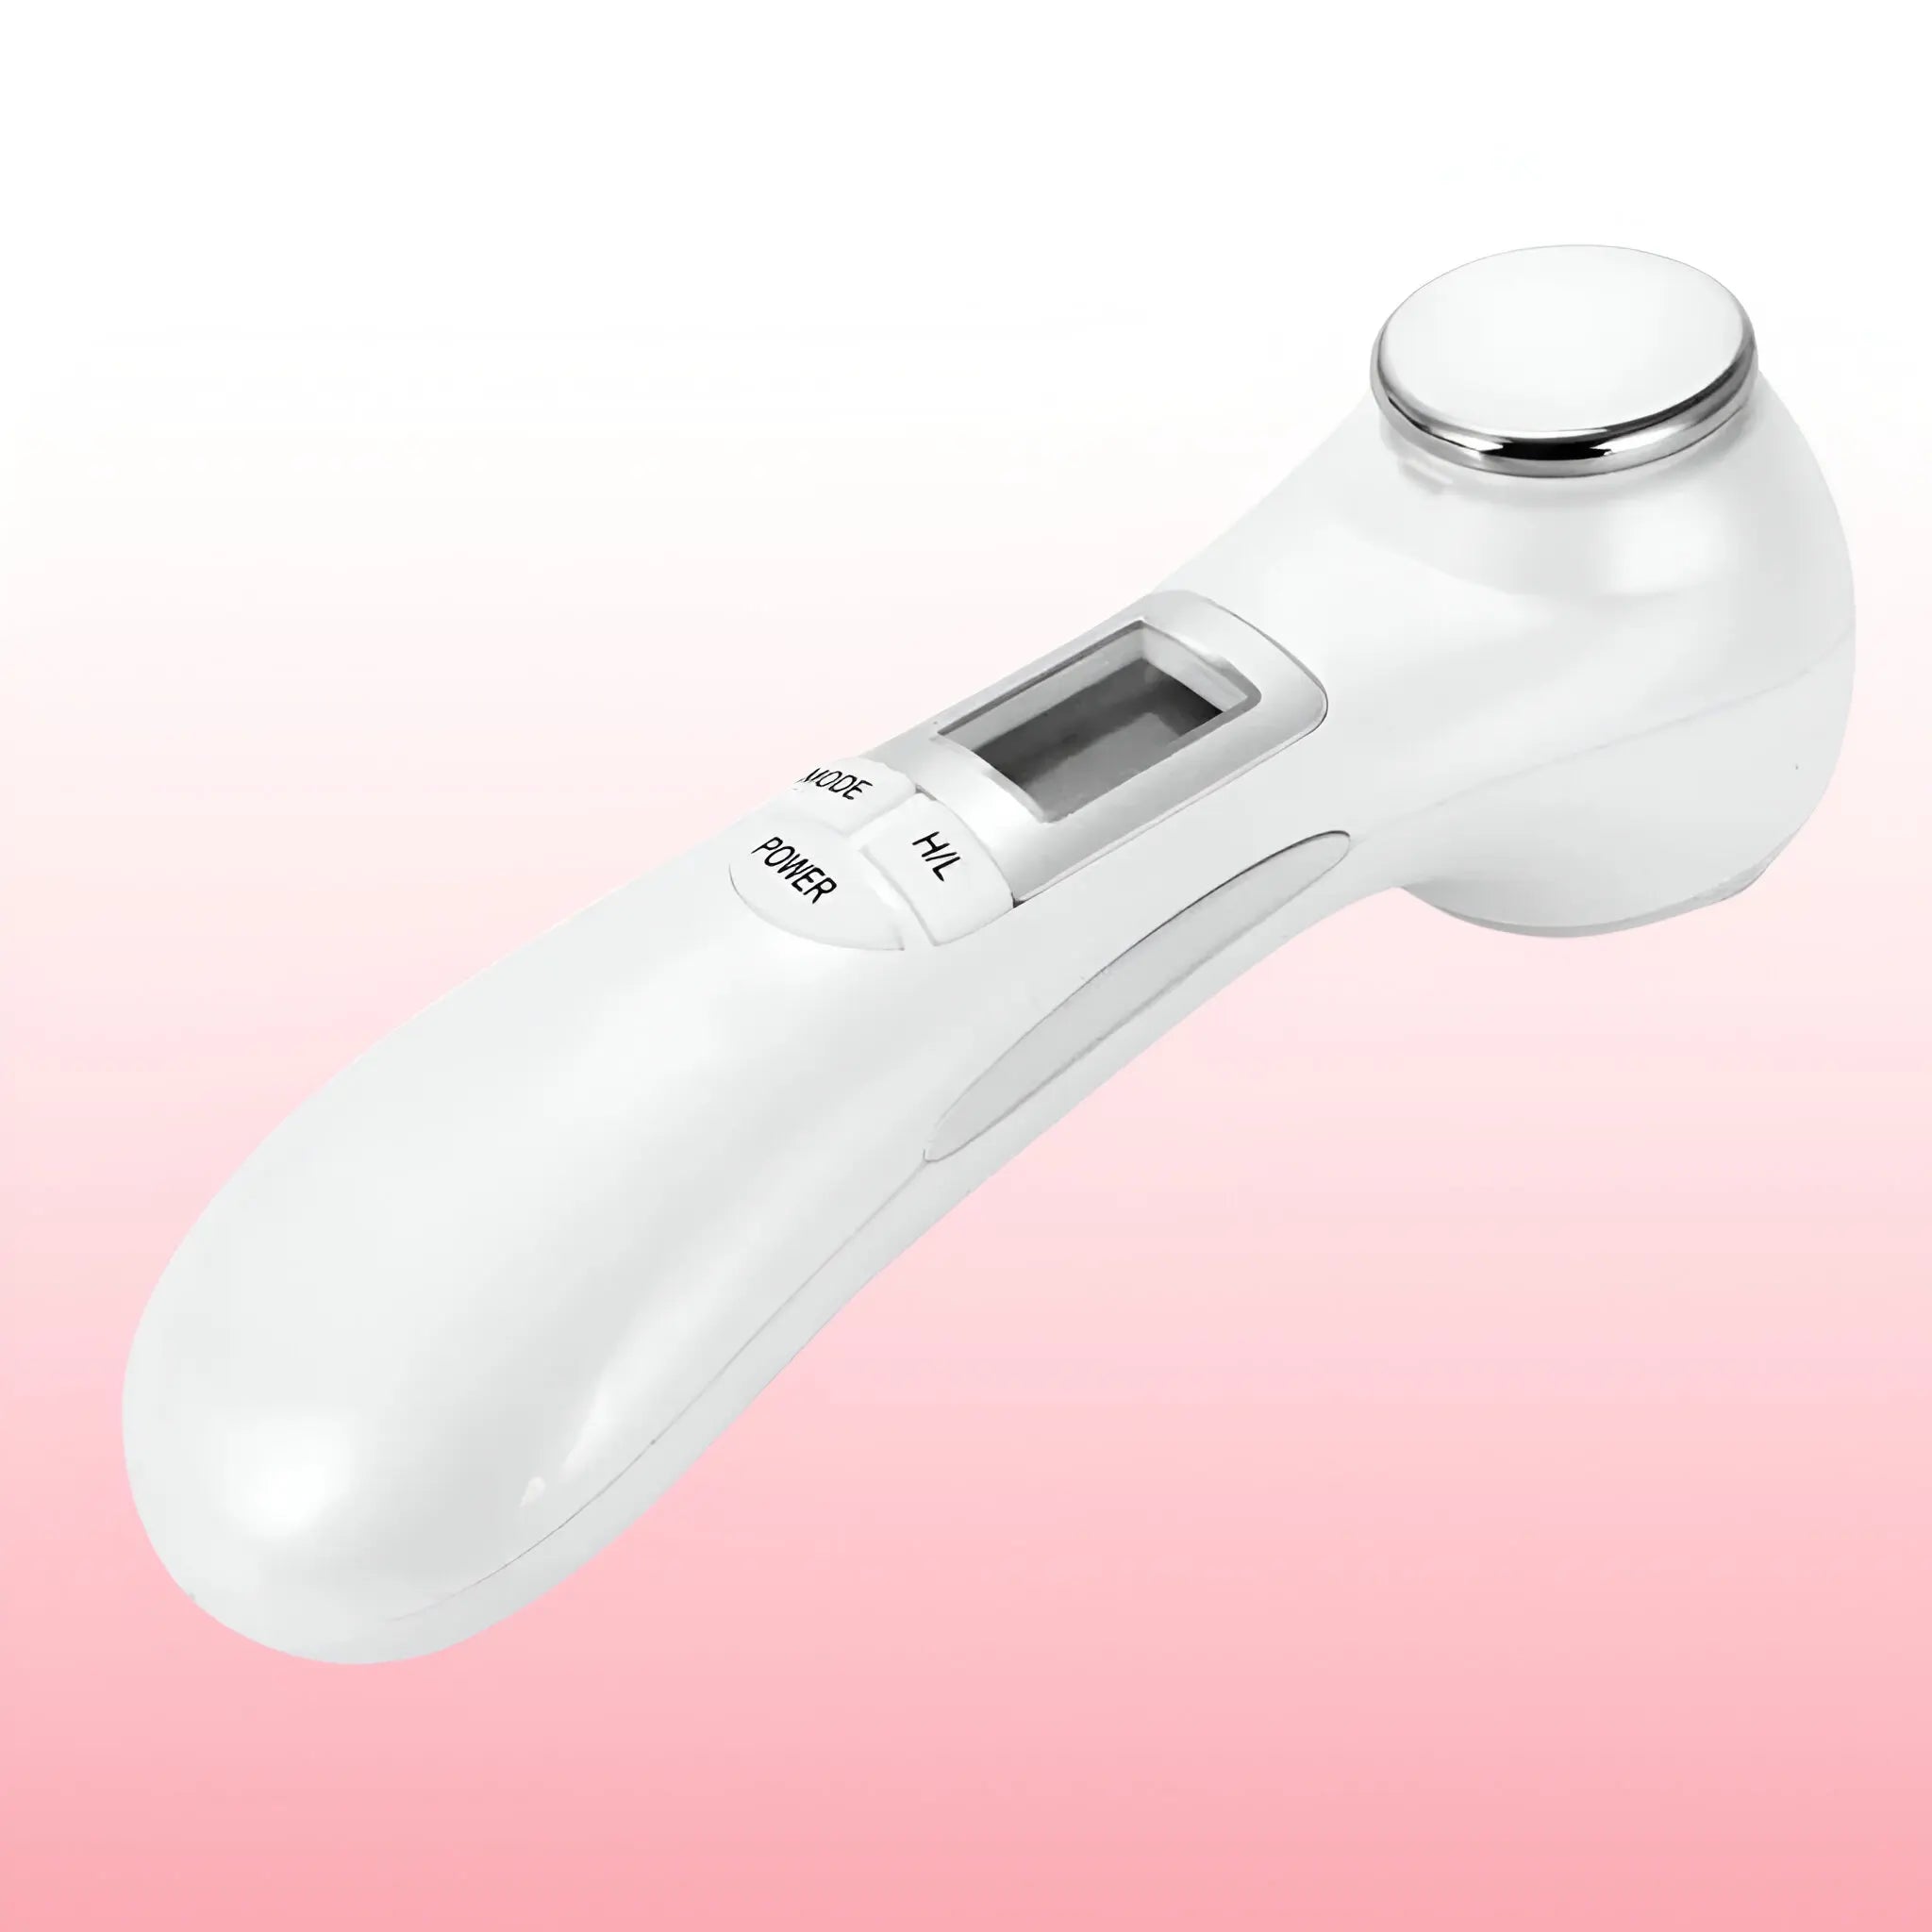 Anti Aging, Electroporation Facial Massager For Visible Healthy Skin